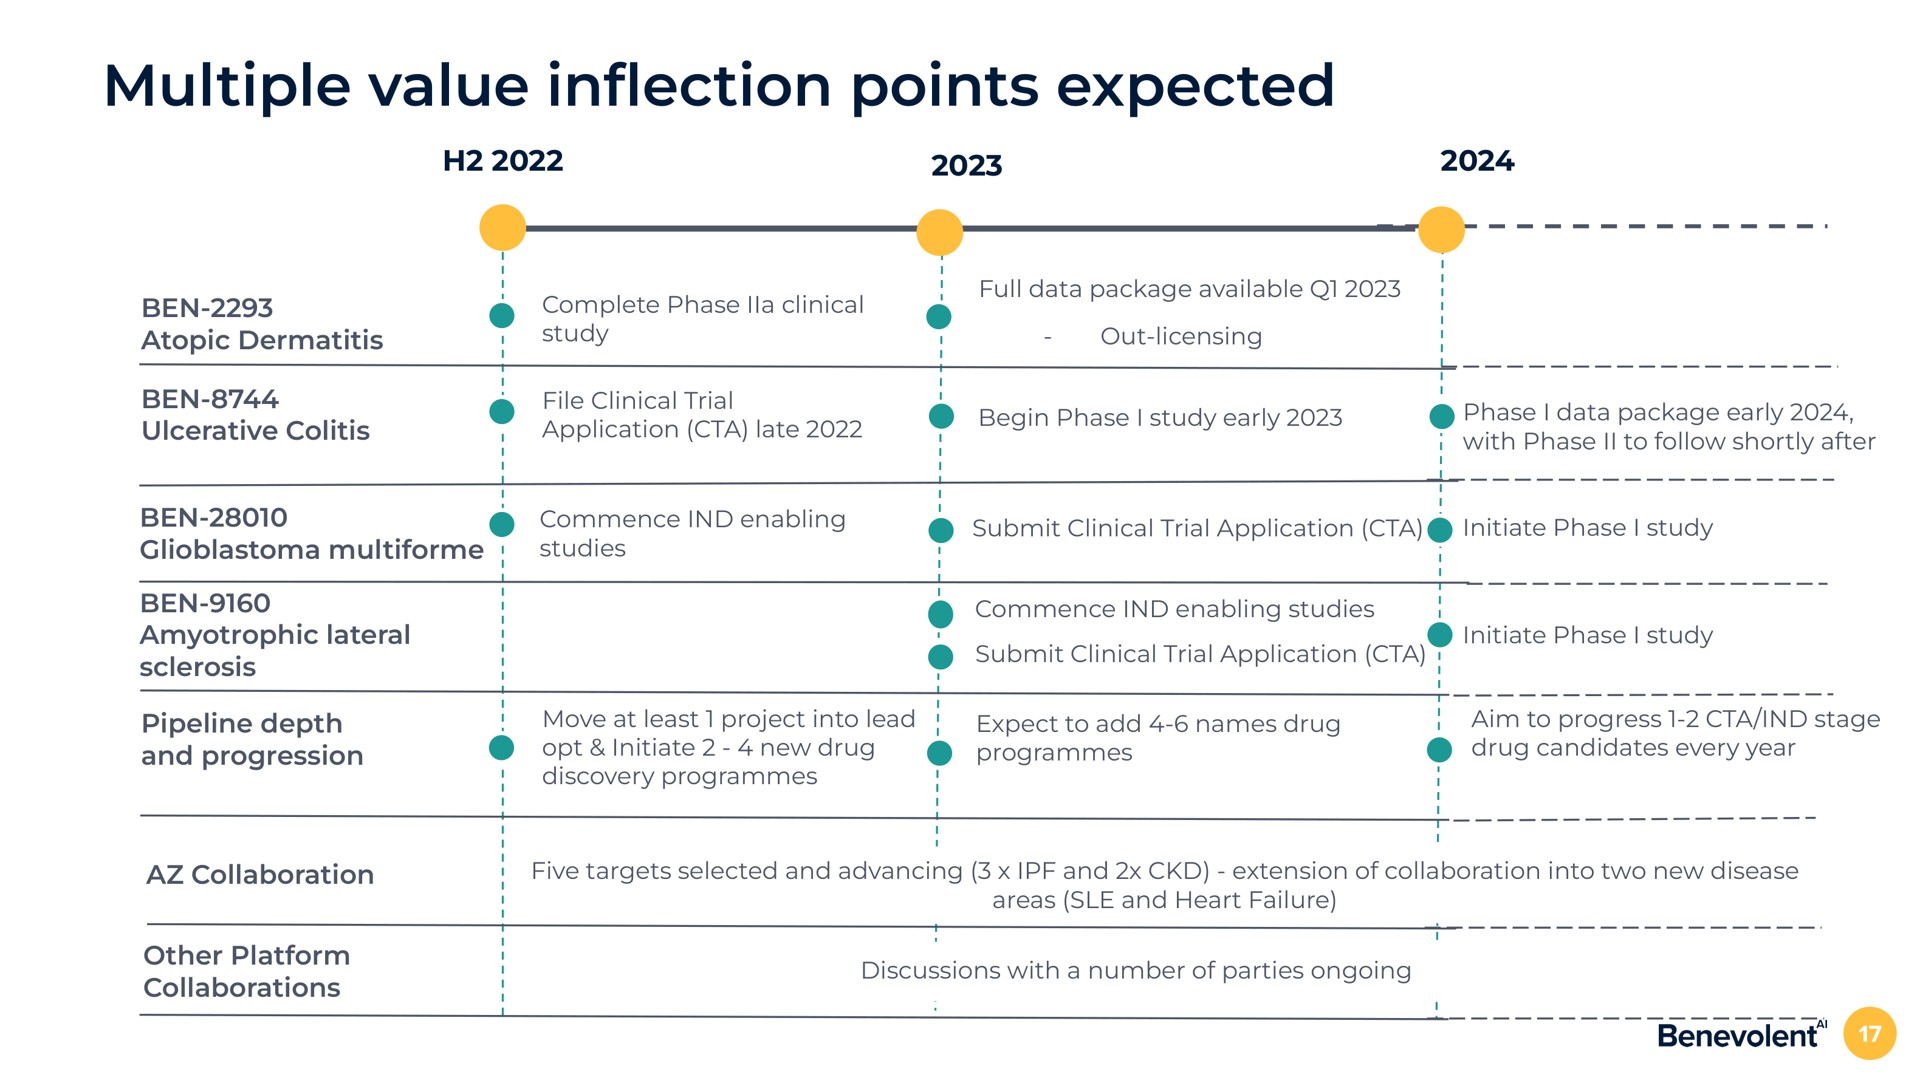 multiple value in points expected ben atopic dermatitis ben ulcerative colitis ben ben amyotrophic lateral sclerosis pipeline depth and progression collaboration other platform collaborations inflection | BenevolentAI